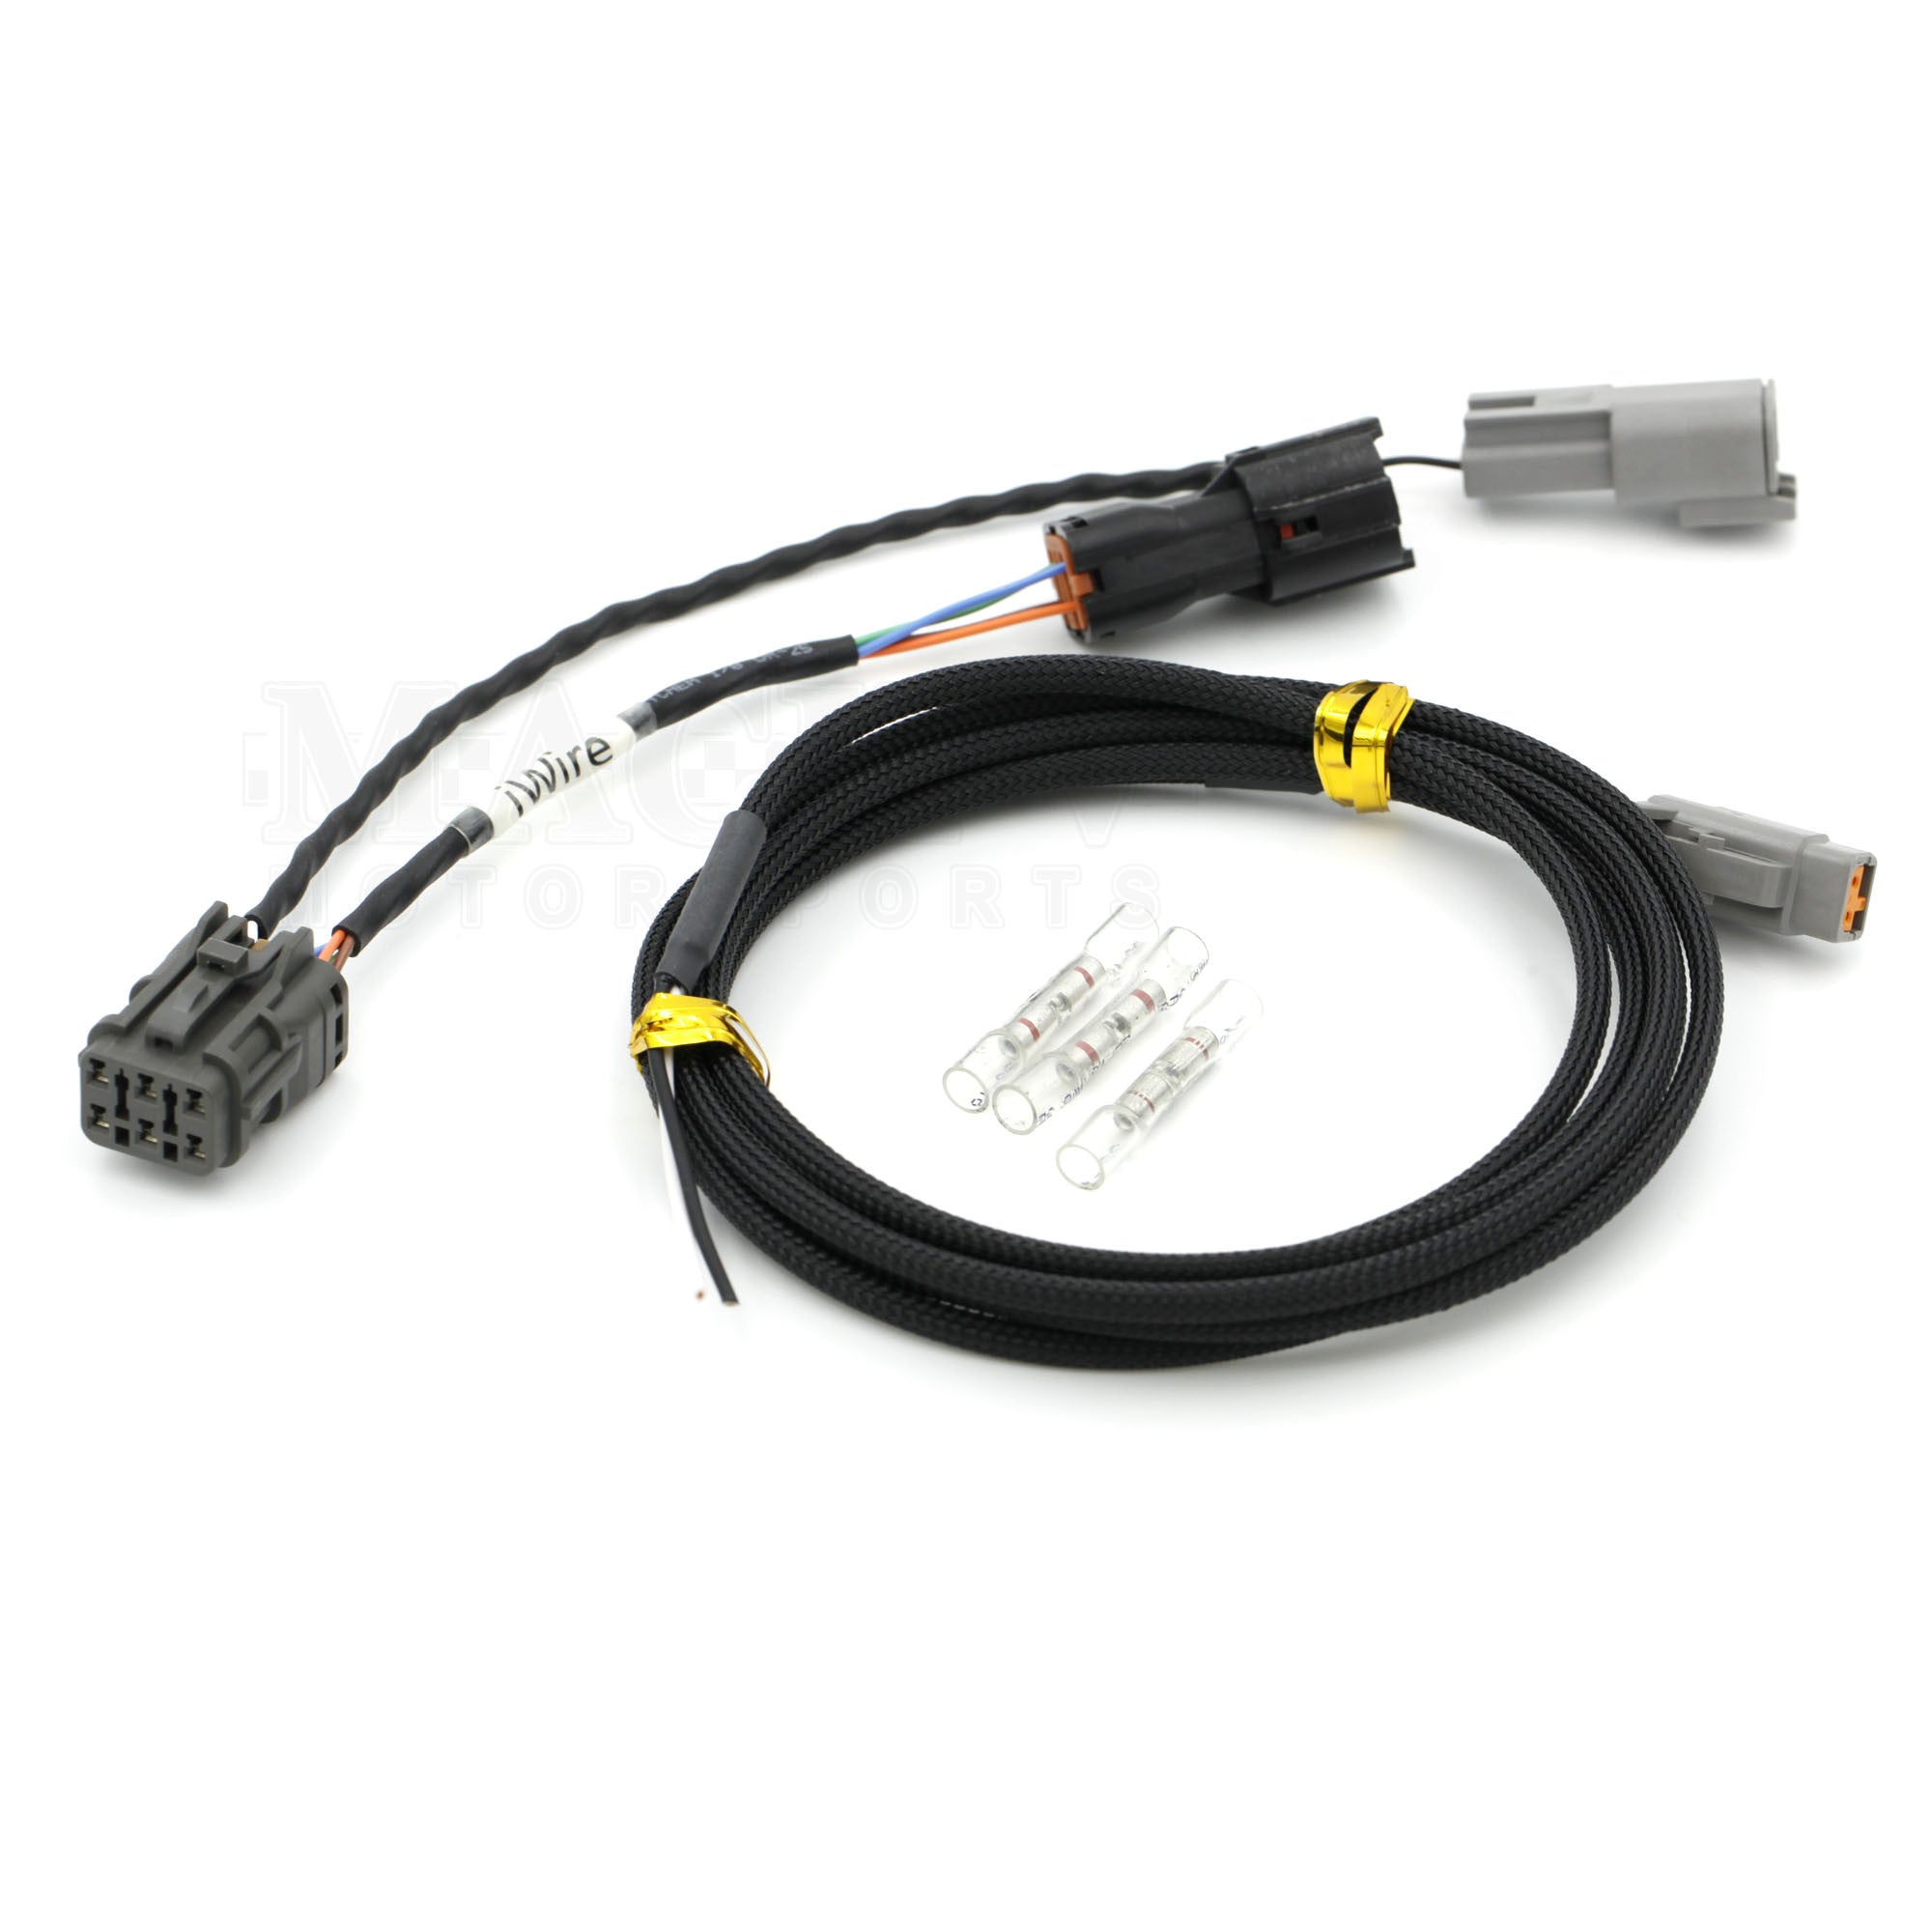 iWire Turbo Trans to DCCD Trans Adapter